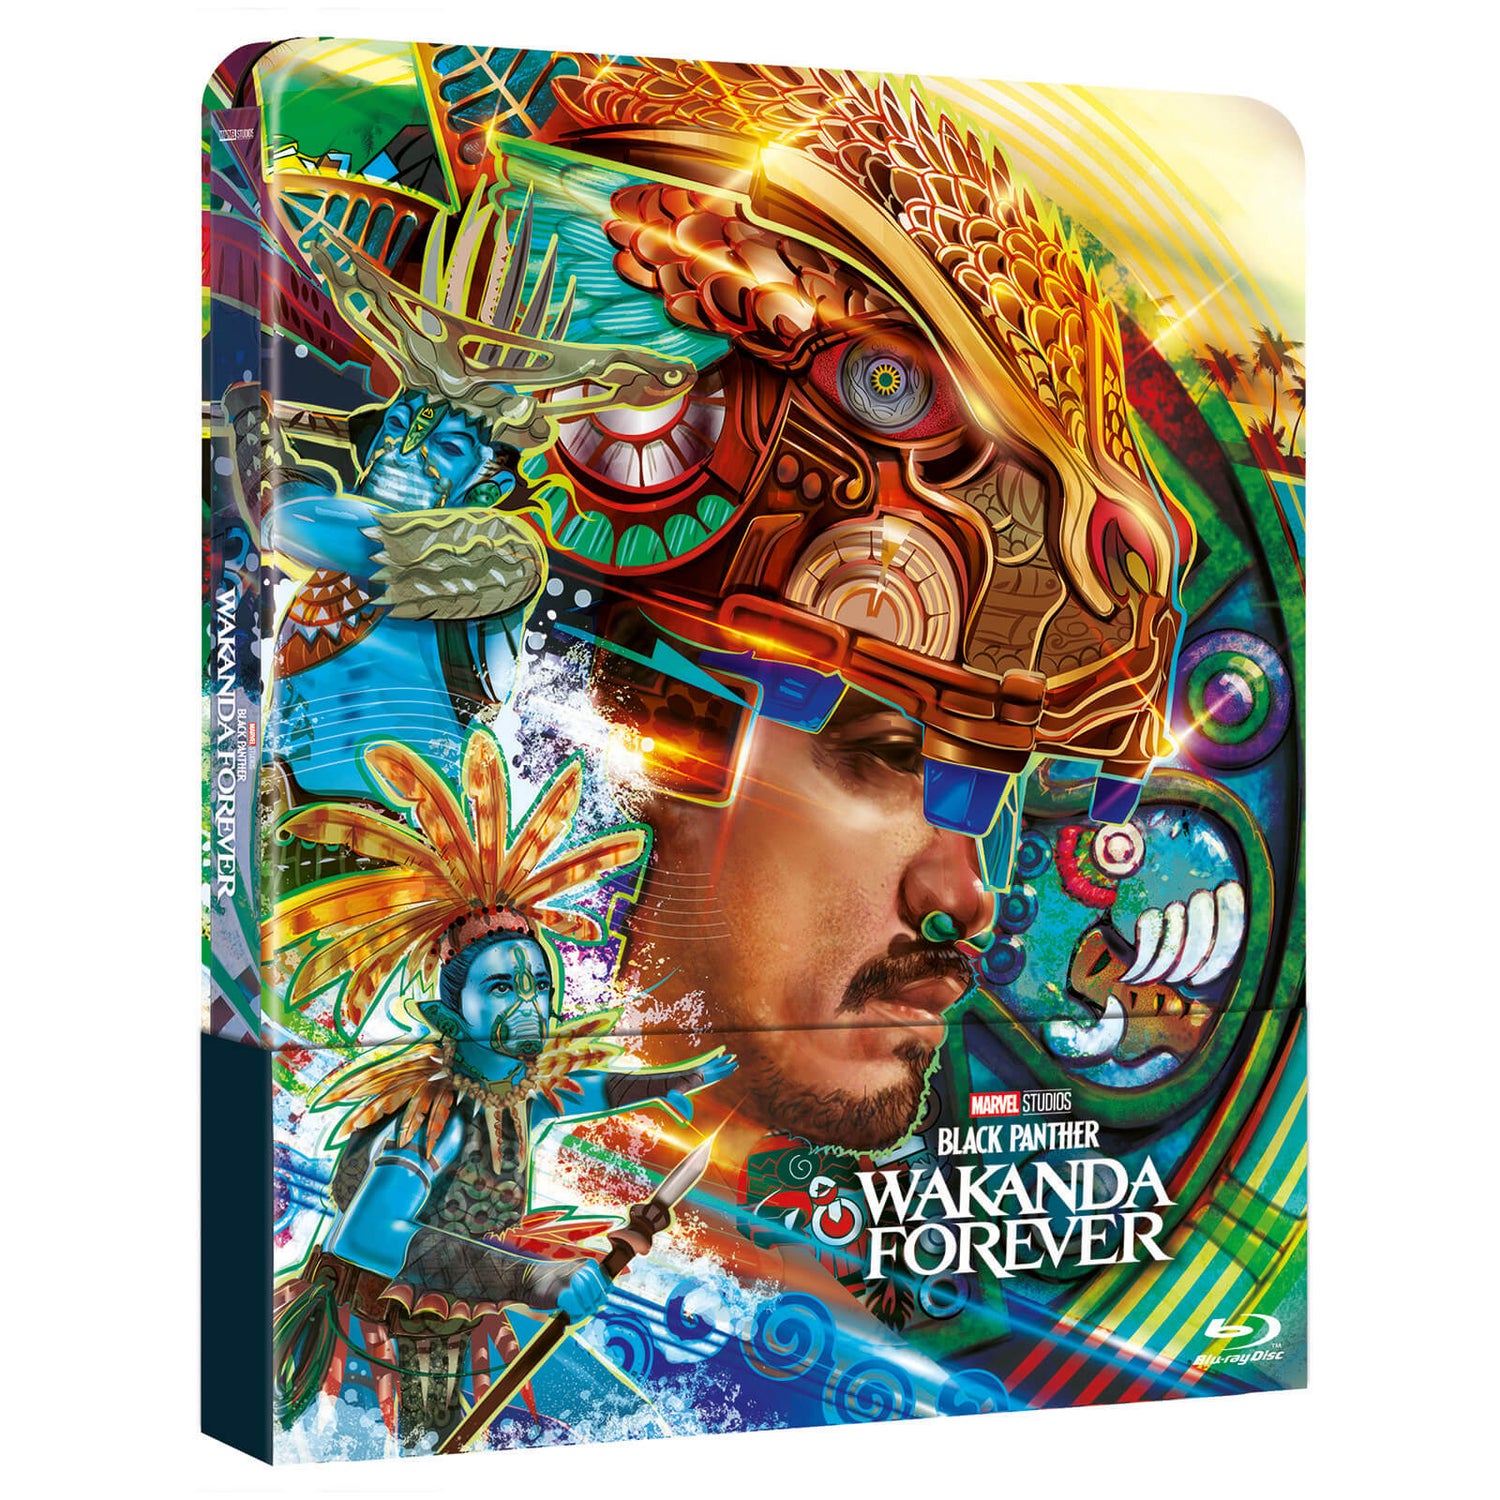 Black Panther: Wakanda Forever Zavvi Exclusive Limited Talokan Edition 4K Ultra HD Steelbook (includes Blu-ray)